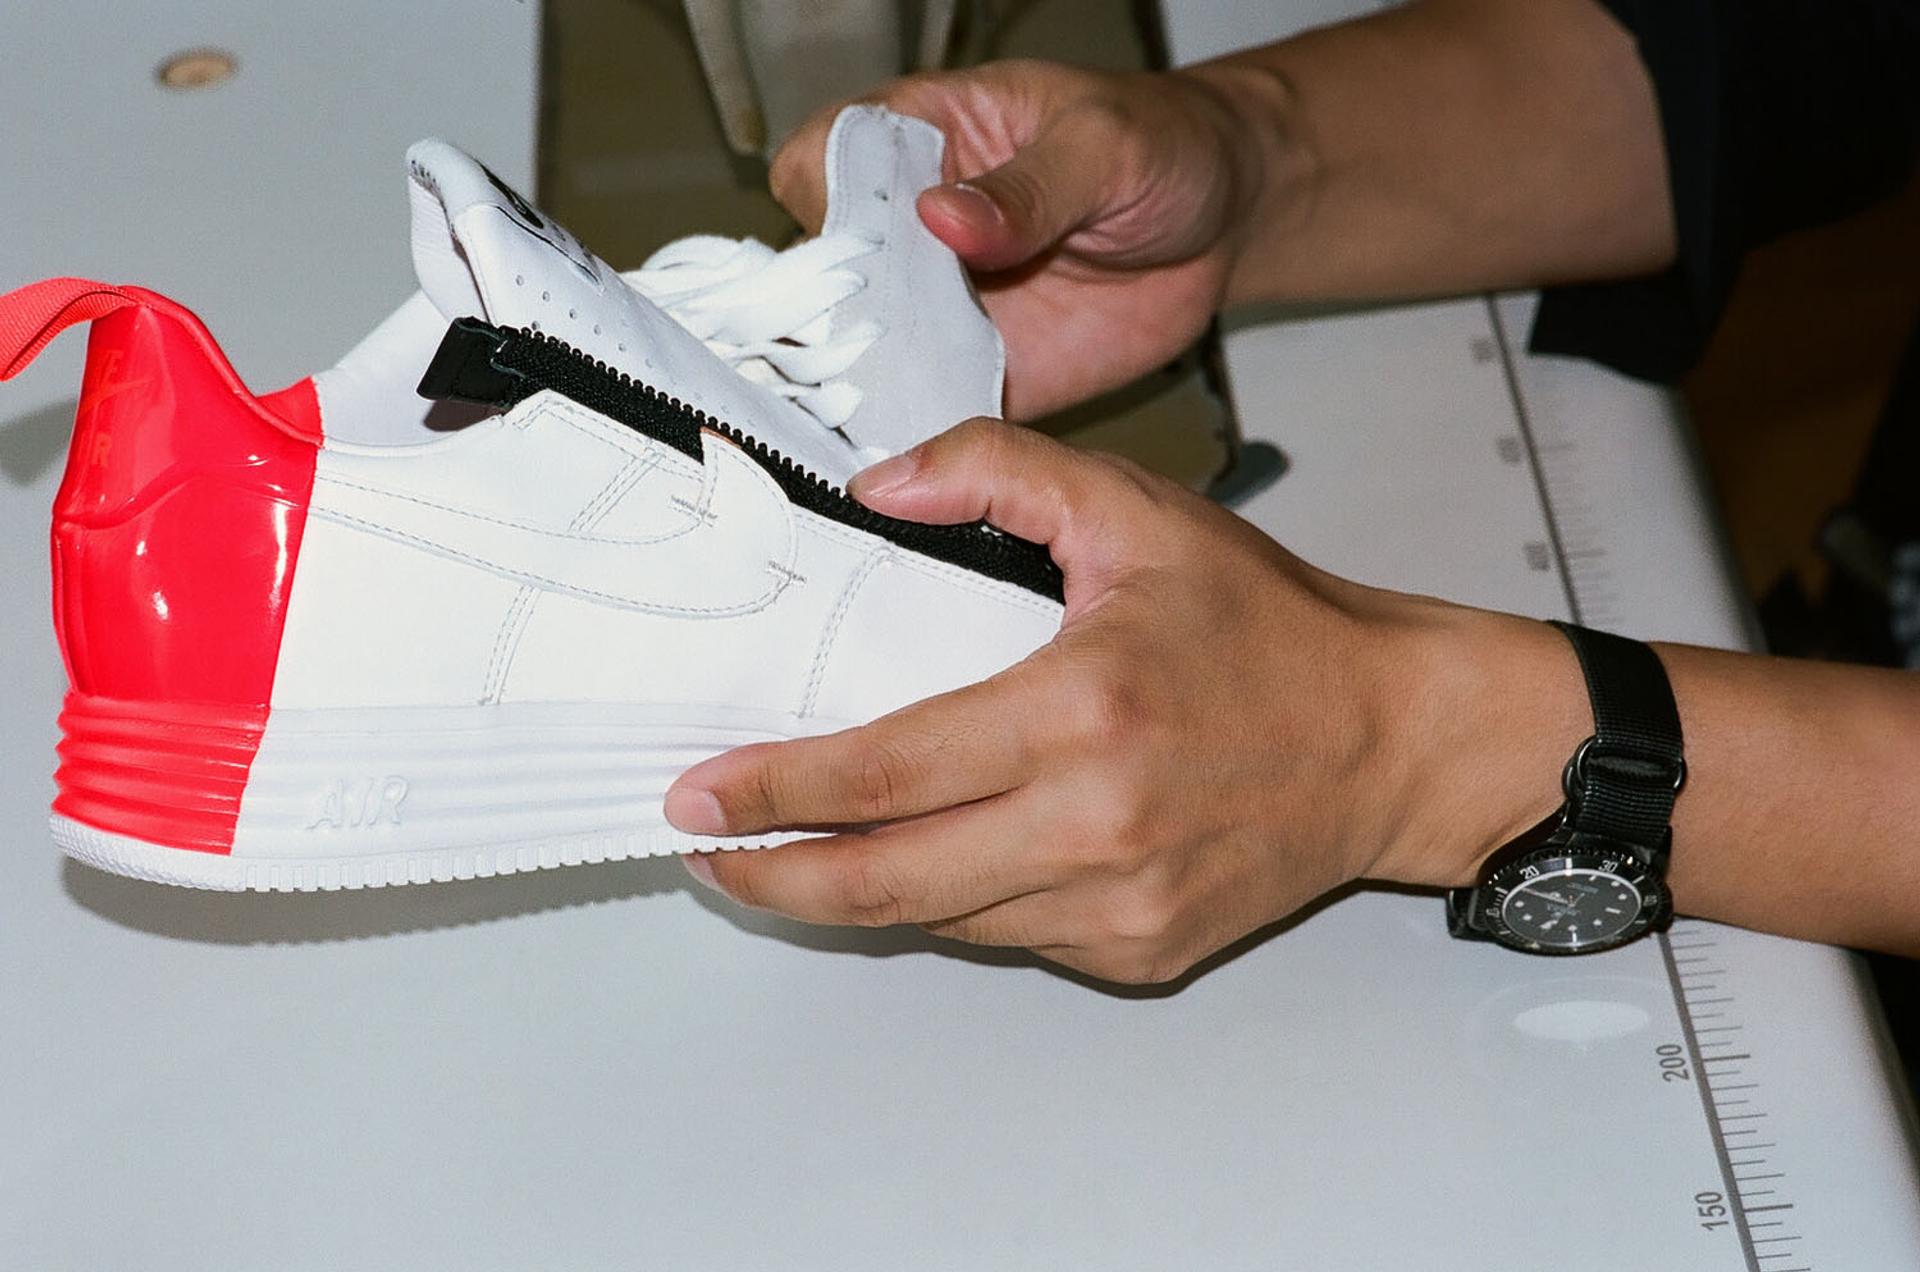 ACRONYM’s Functional Intervention on the NIKE Air Force One